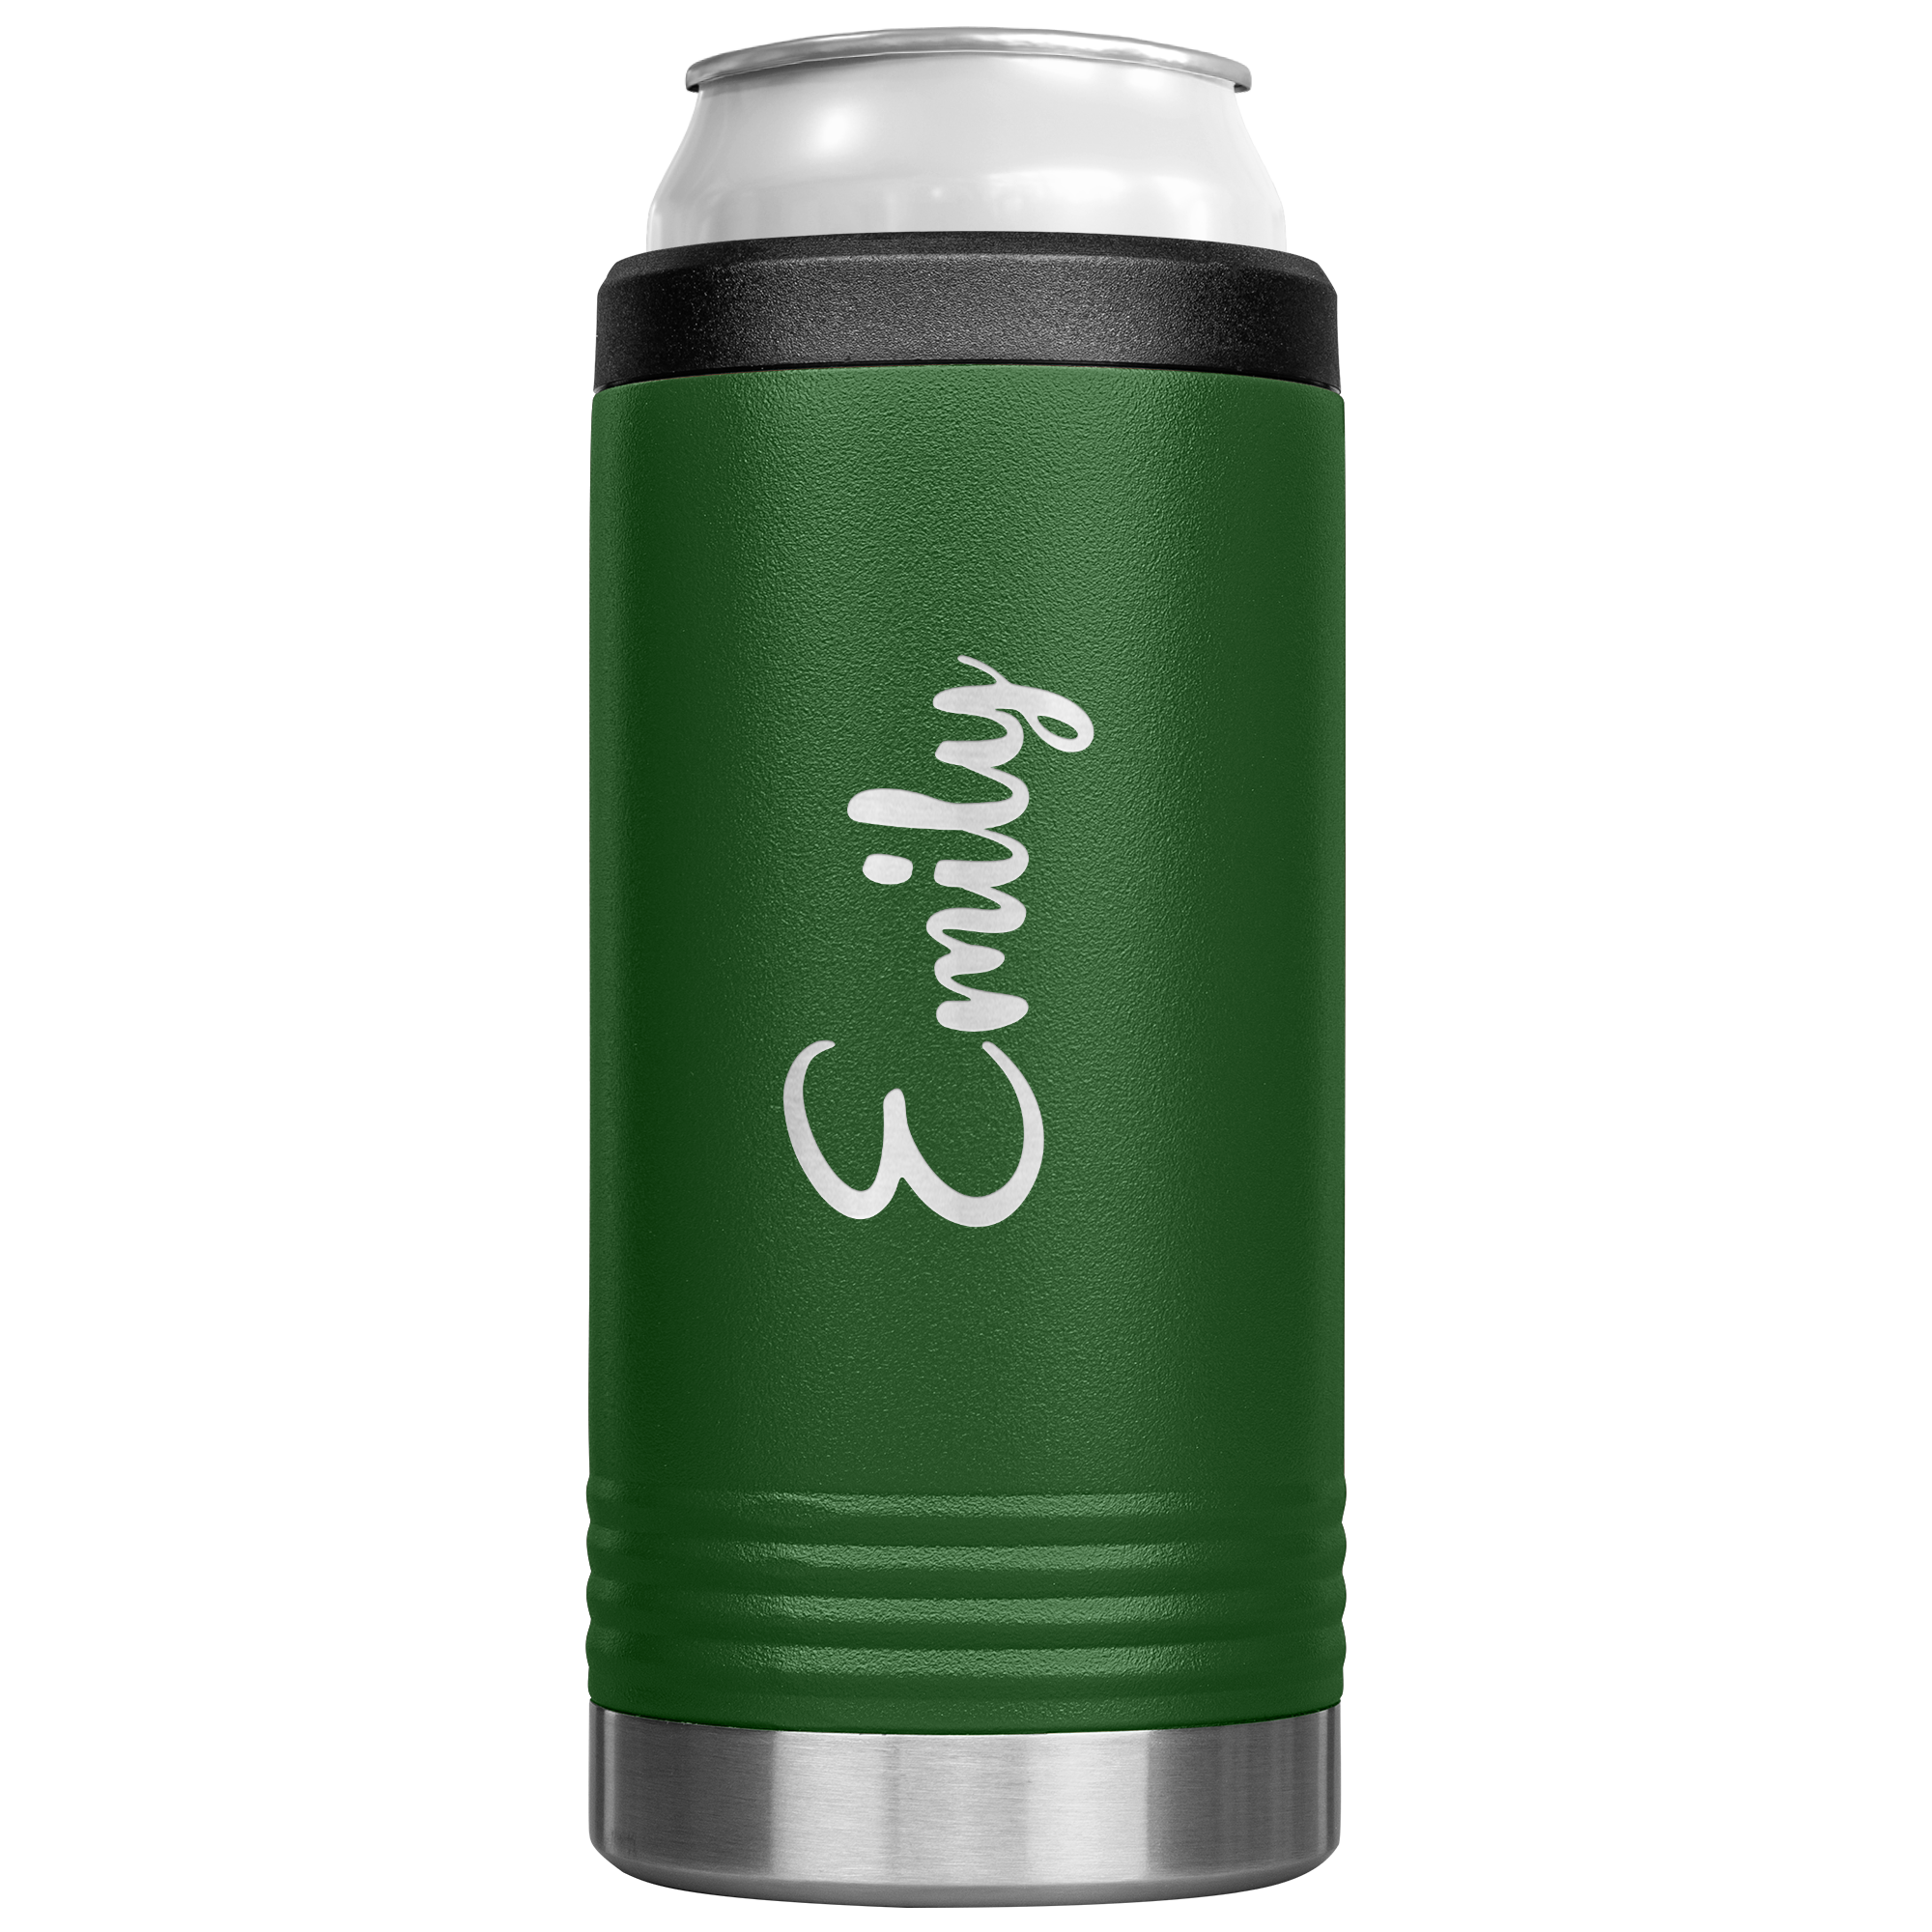 https://lantsagifts.com/wp-content/uploads/2022/10/Made-To-Teach-Personalized-Koozie-Green-1.png